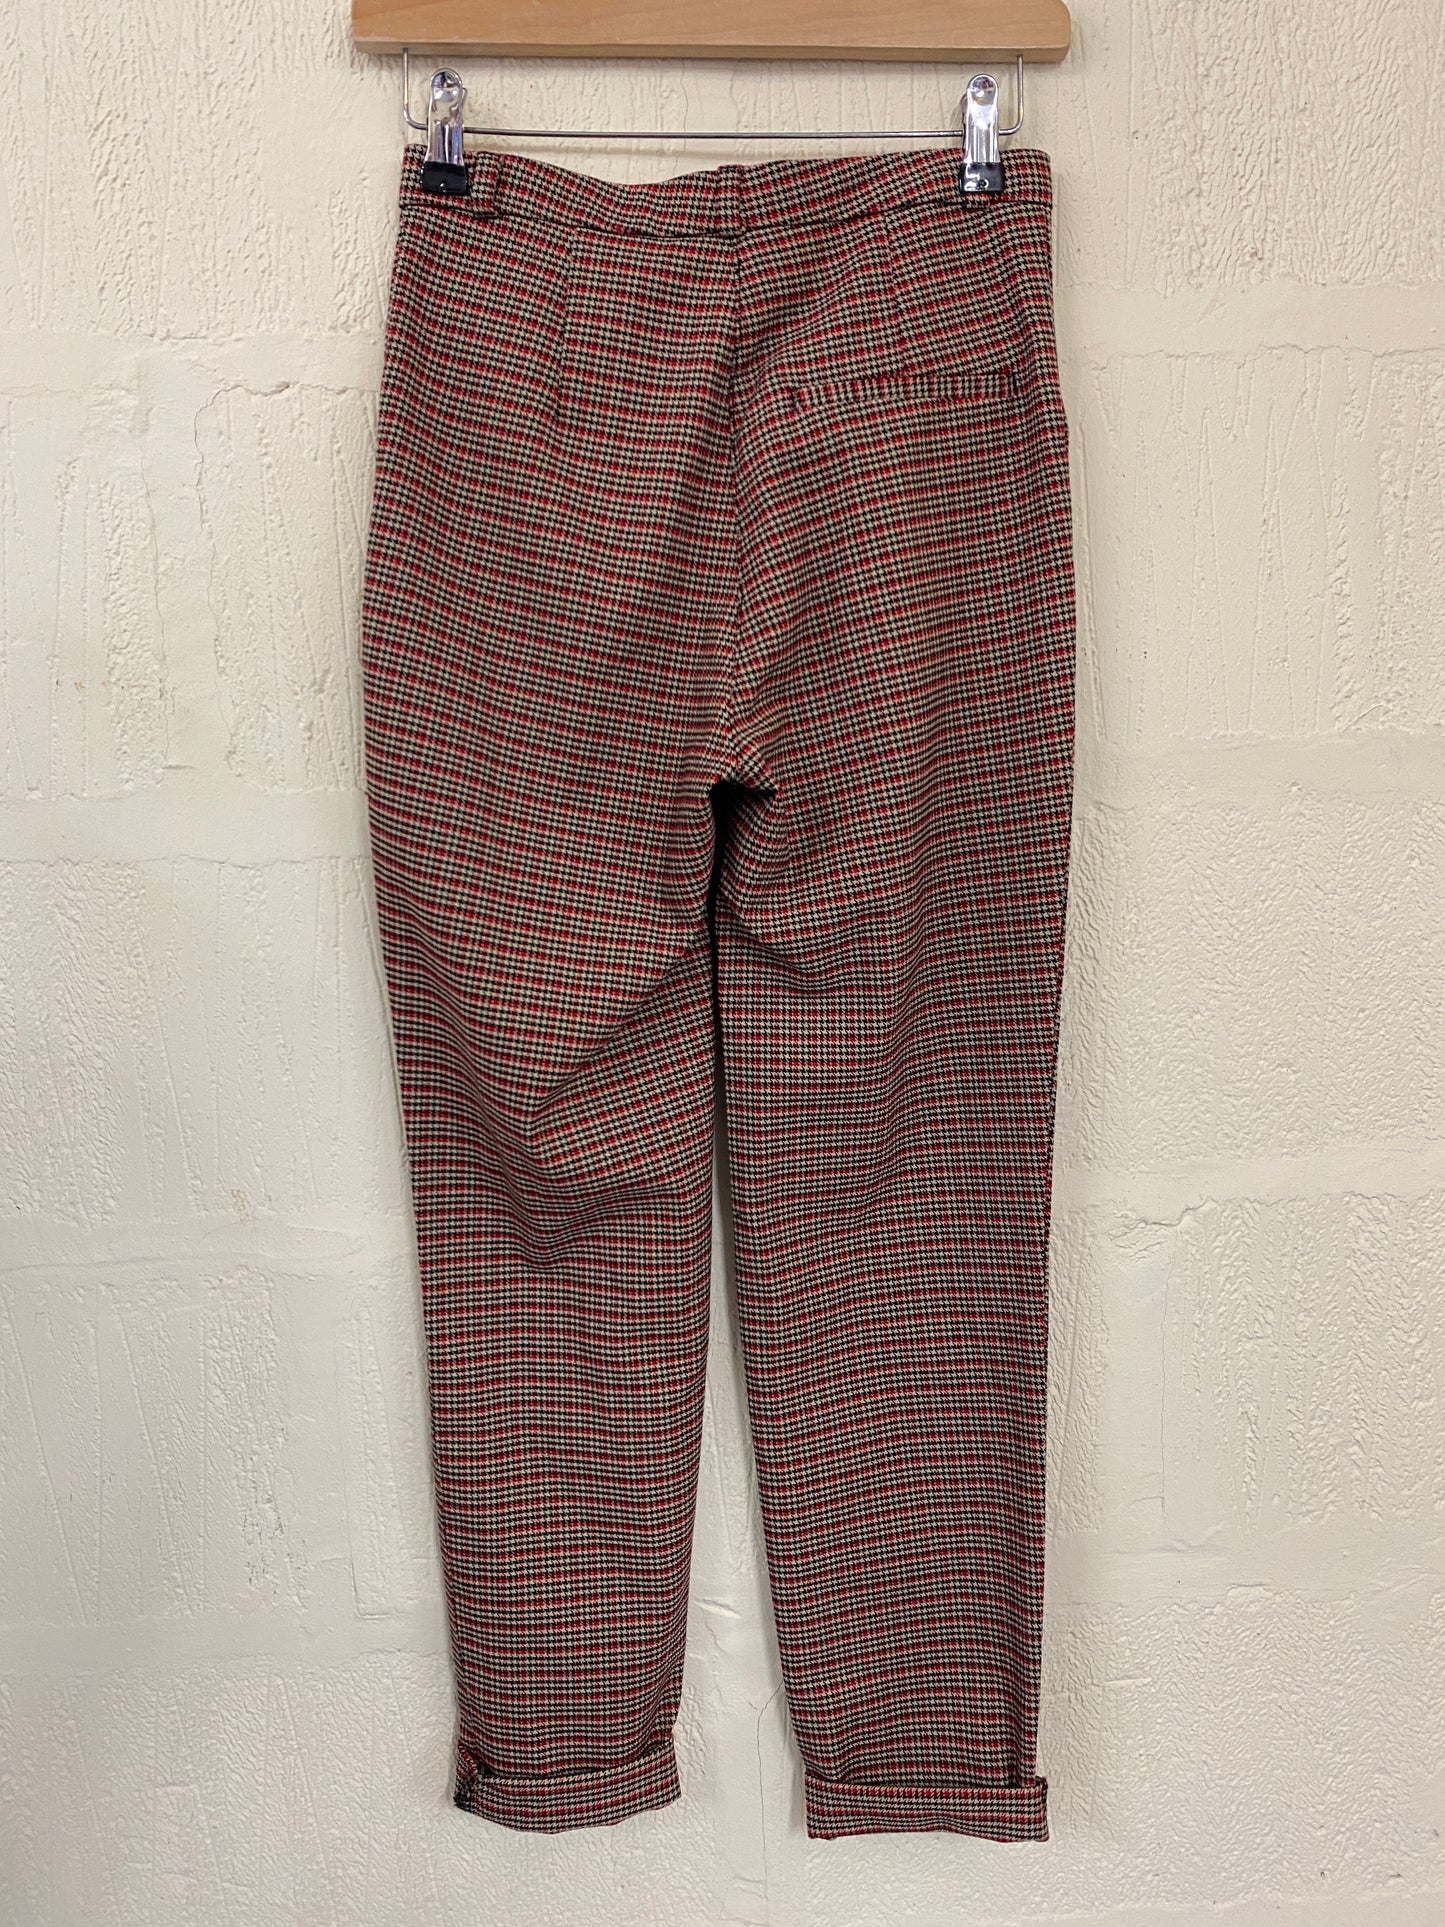 Red & Black Dogtooth Skinny Fit Trousers Size 8